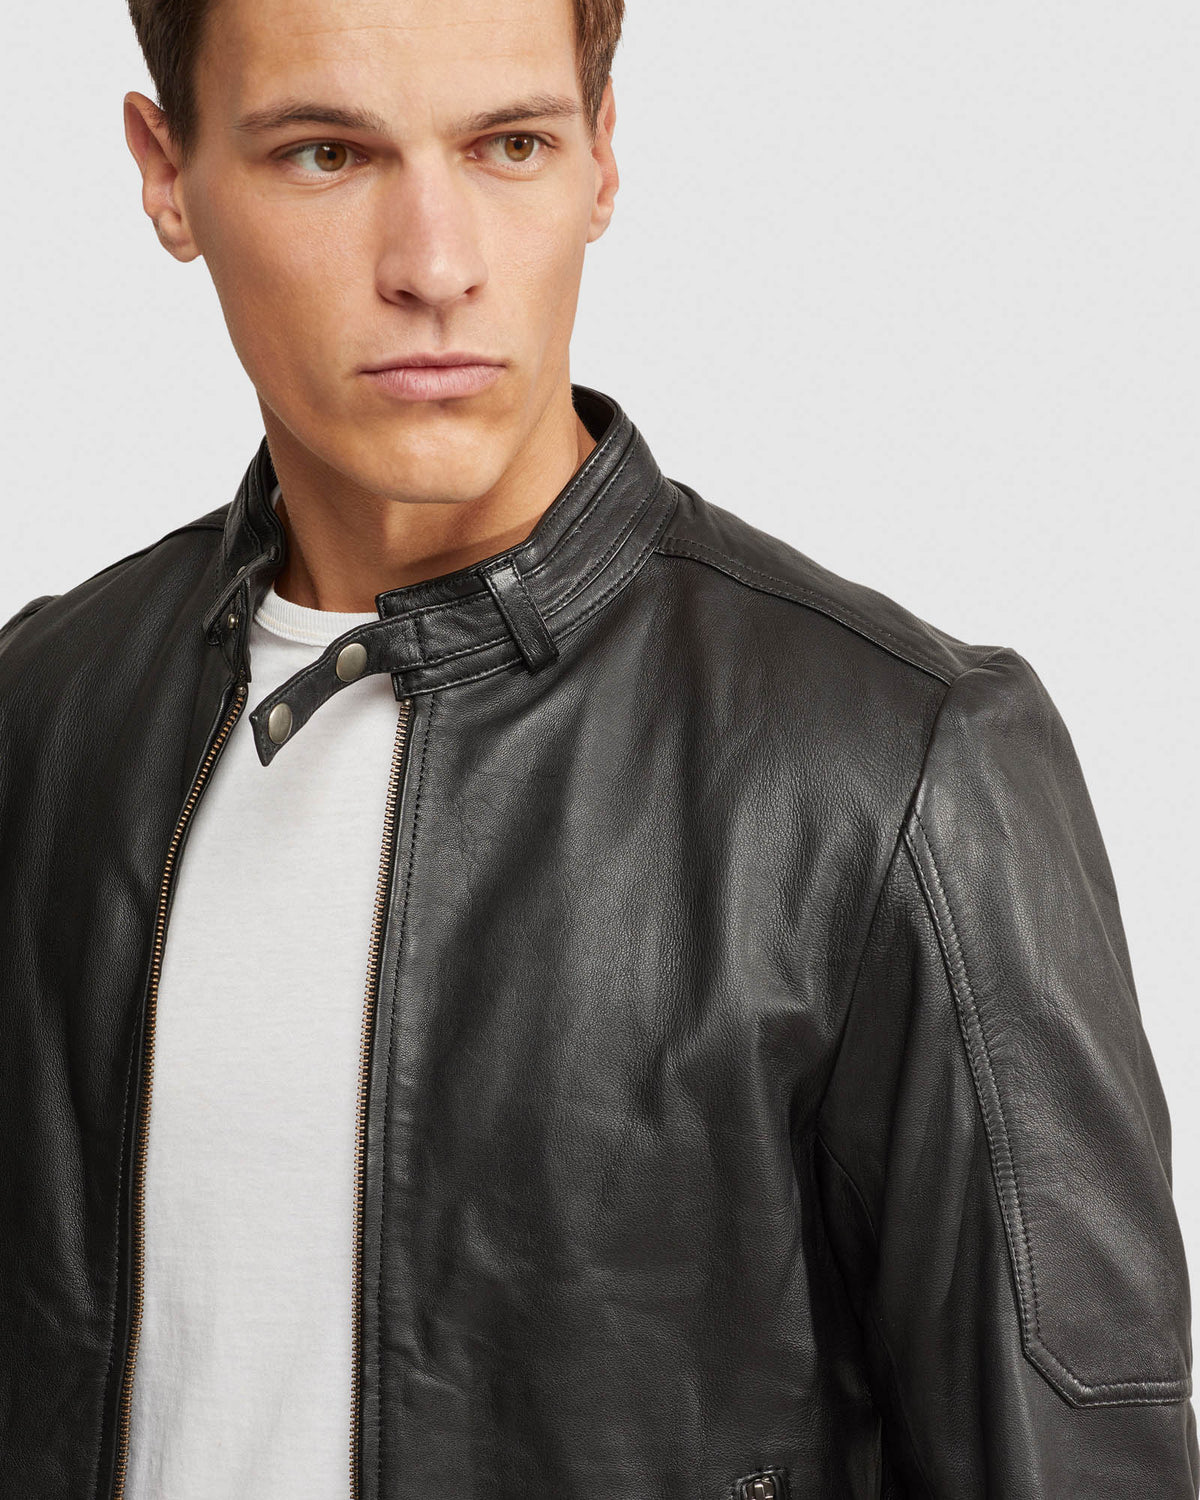 What To Wear With Brown Leather Jacket for Men? | Leather Jacket Shop